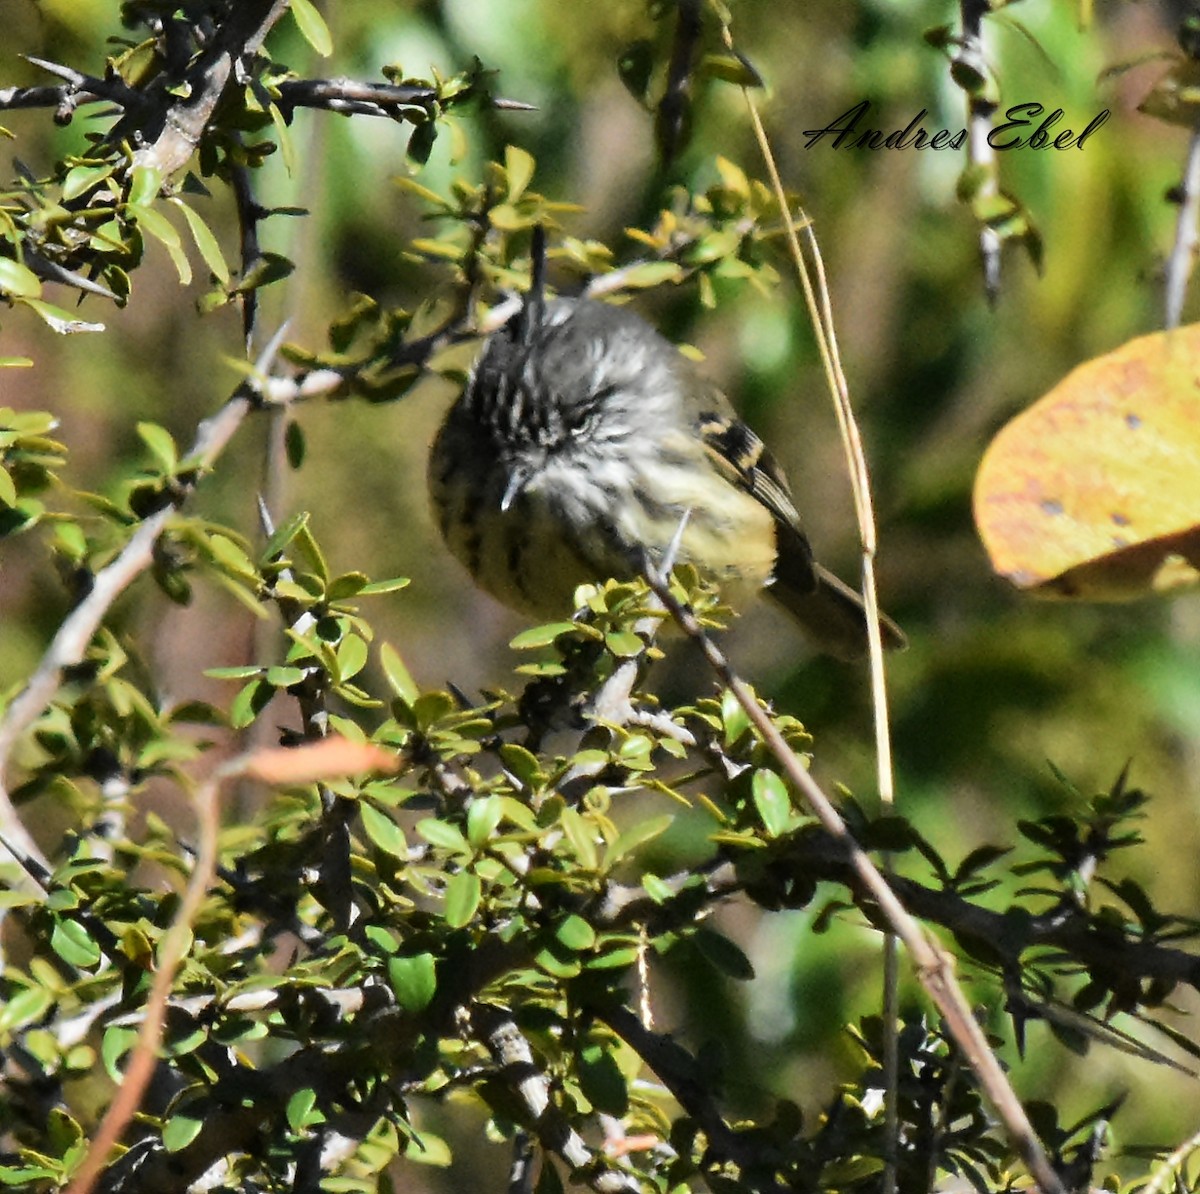 Tufted Tit-Tyrant - andres ebel